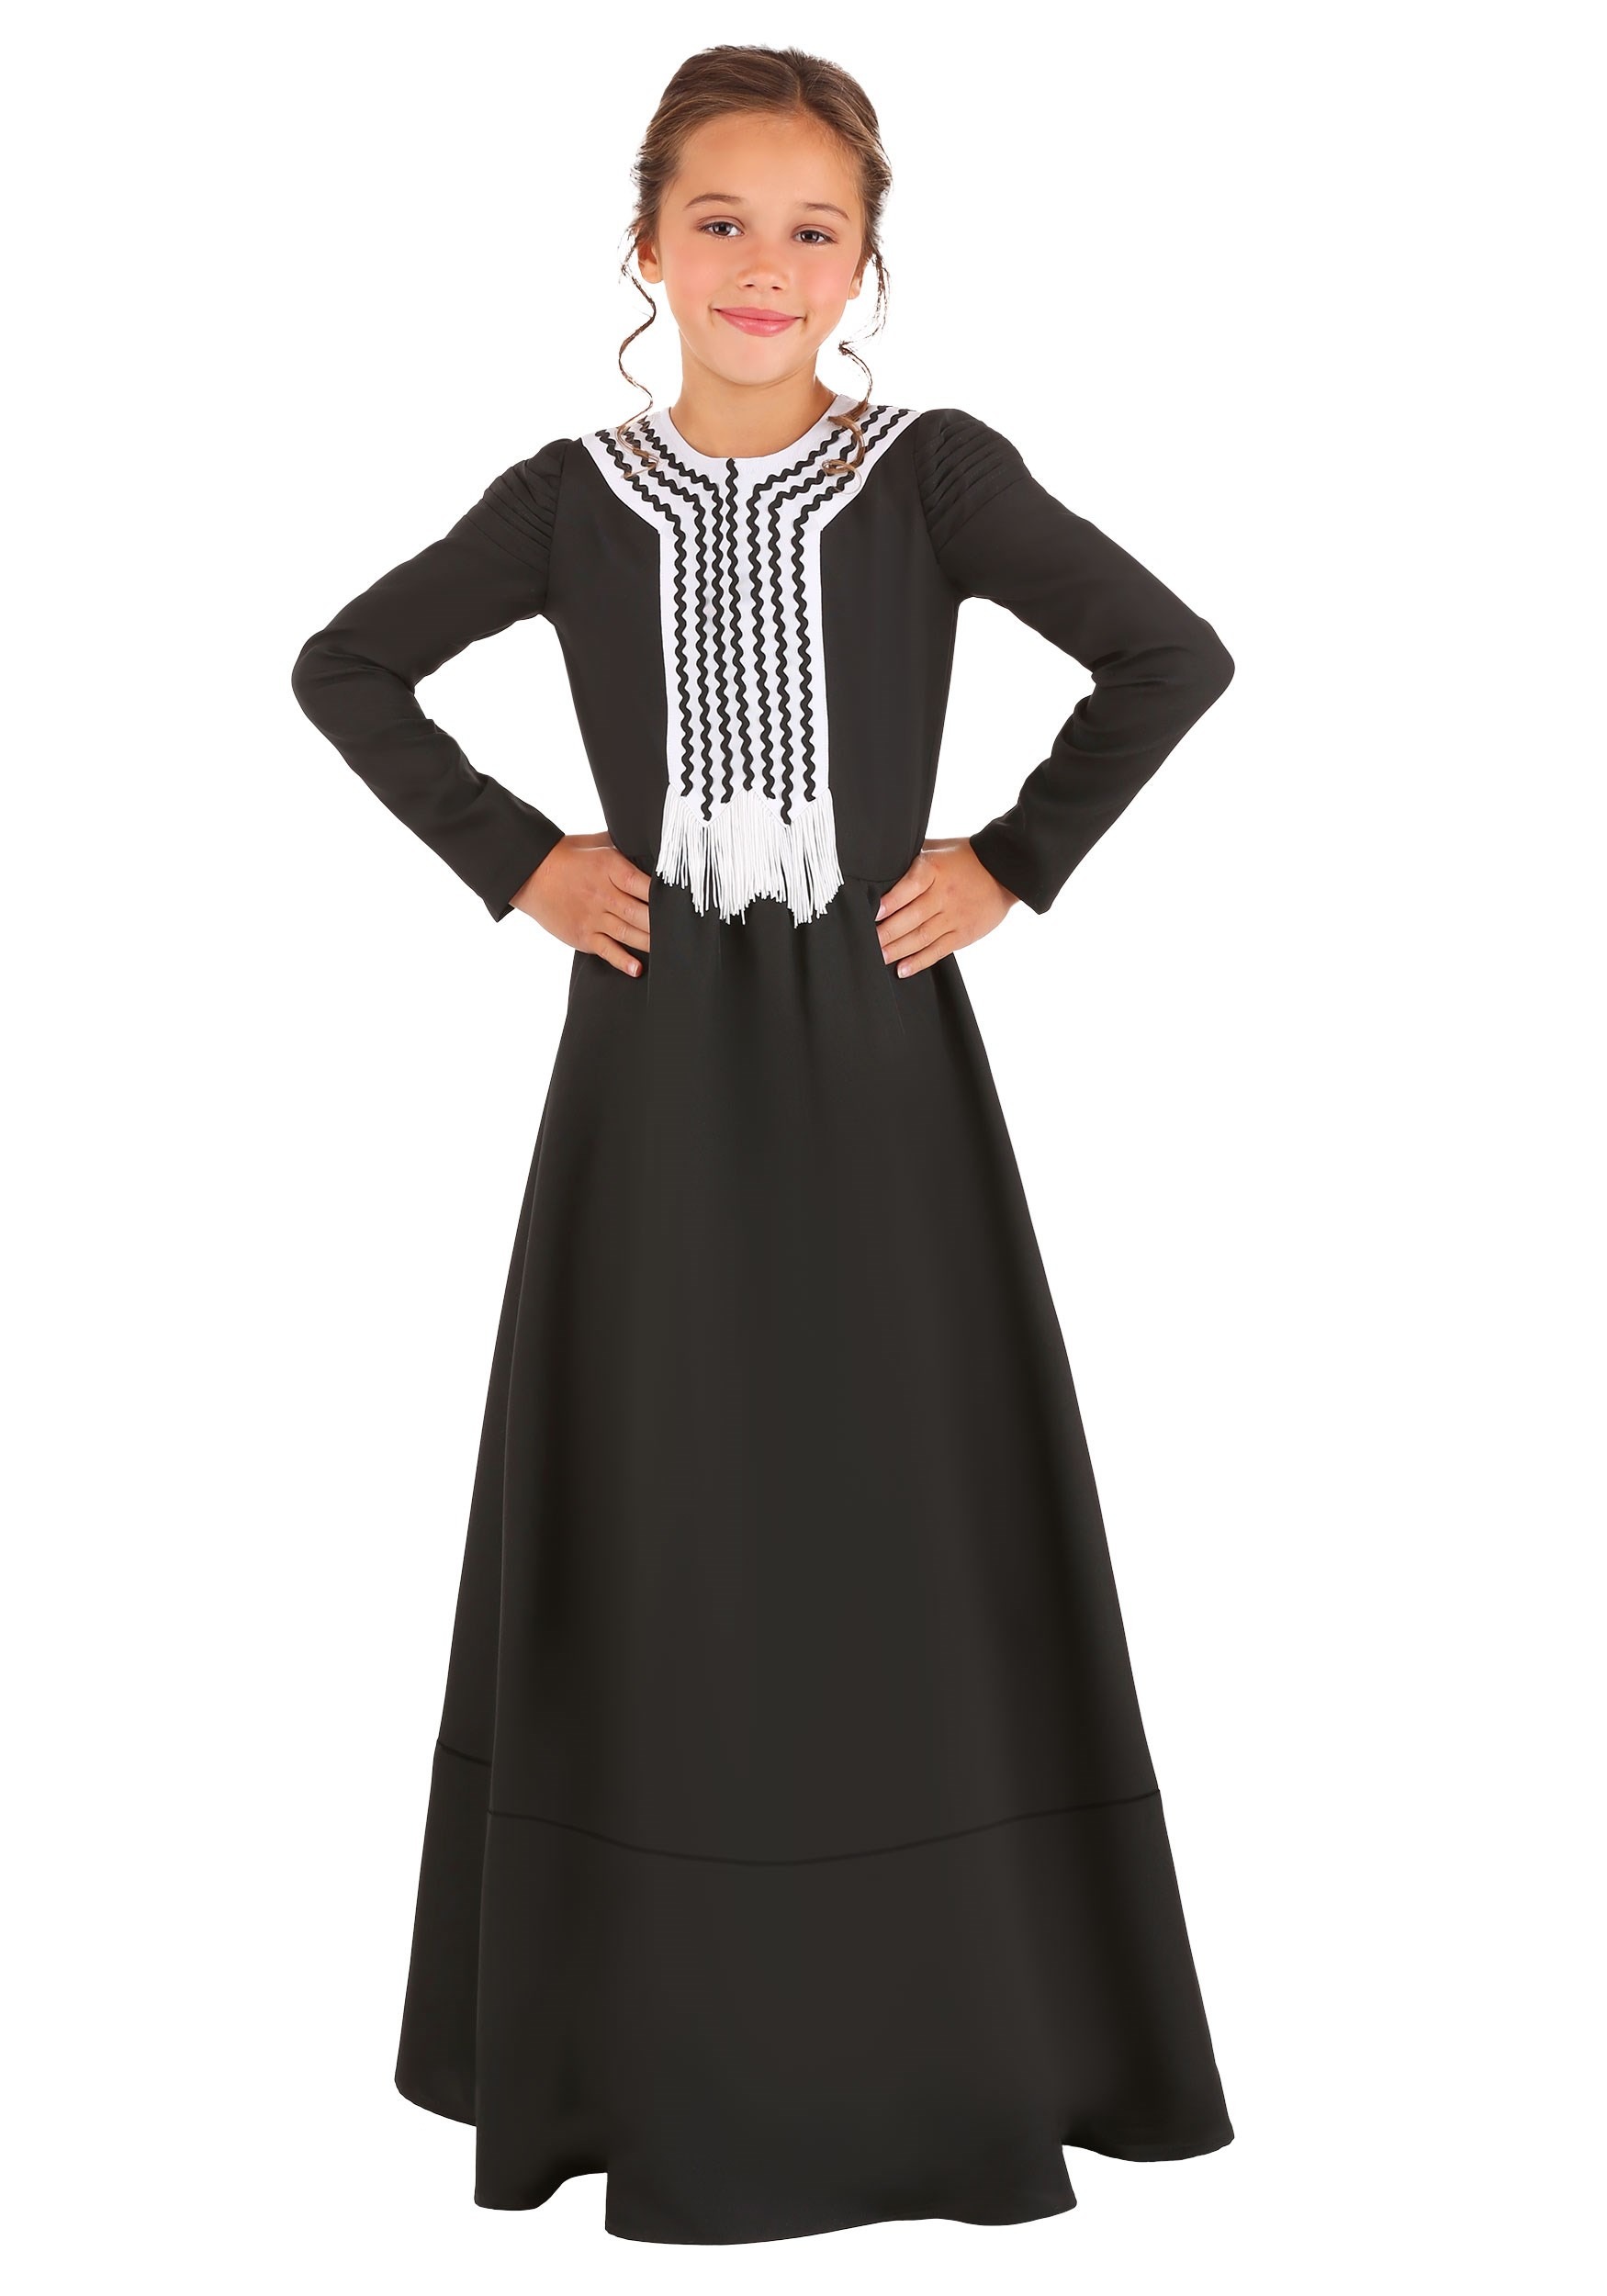 Image of Marie Curie Costume for Girls ID FUN0977CH-L